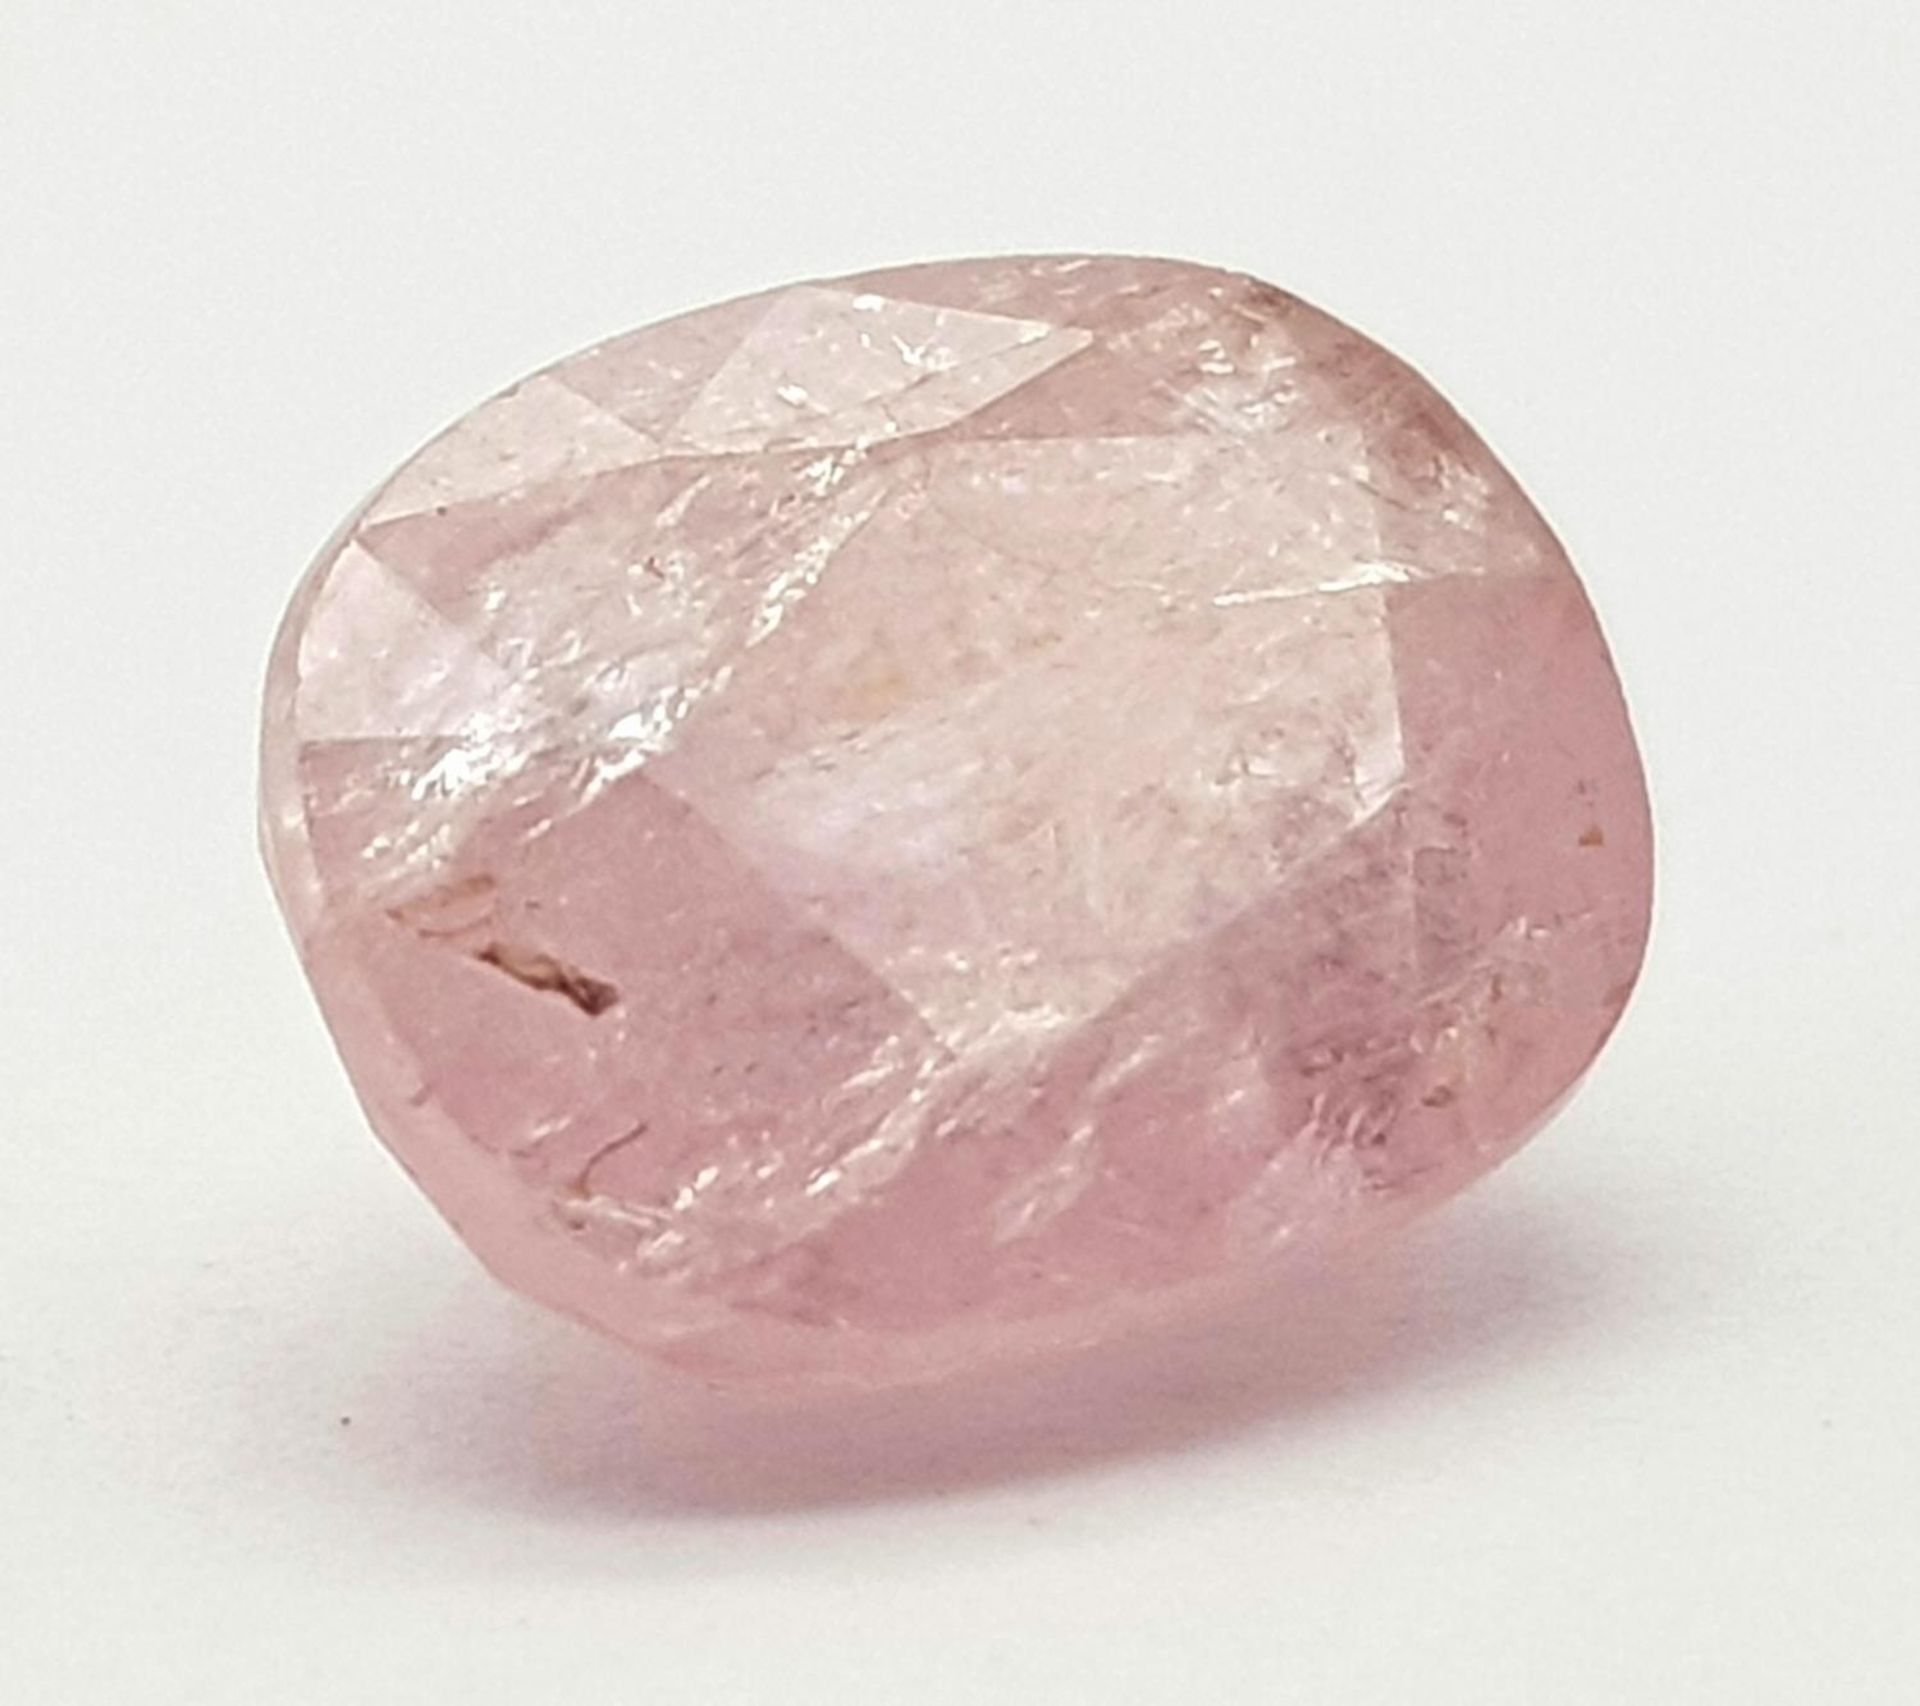 A 5.10ct Rare Peach-Pink Coloured Untreated Sapphire Gemstone - GFCO Swiss Certified.